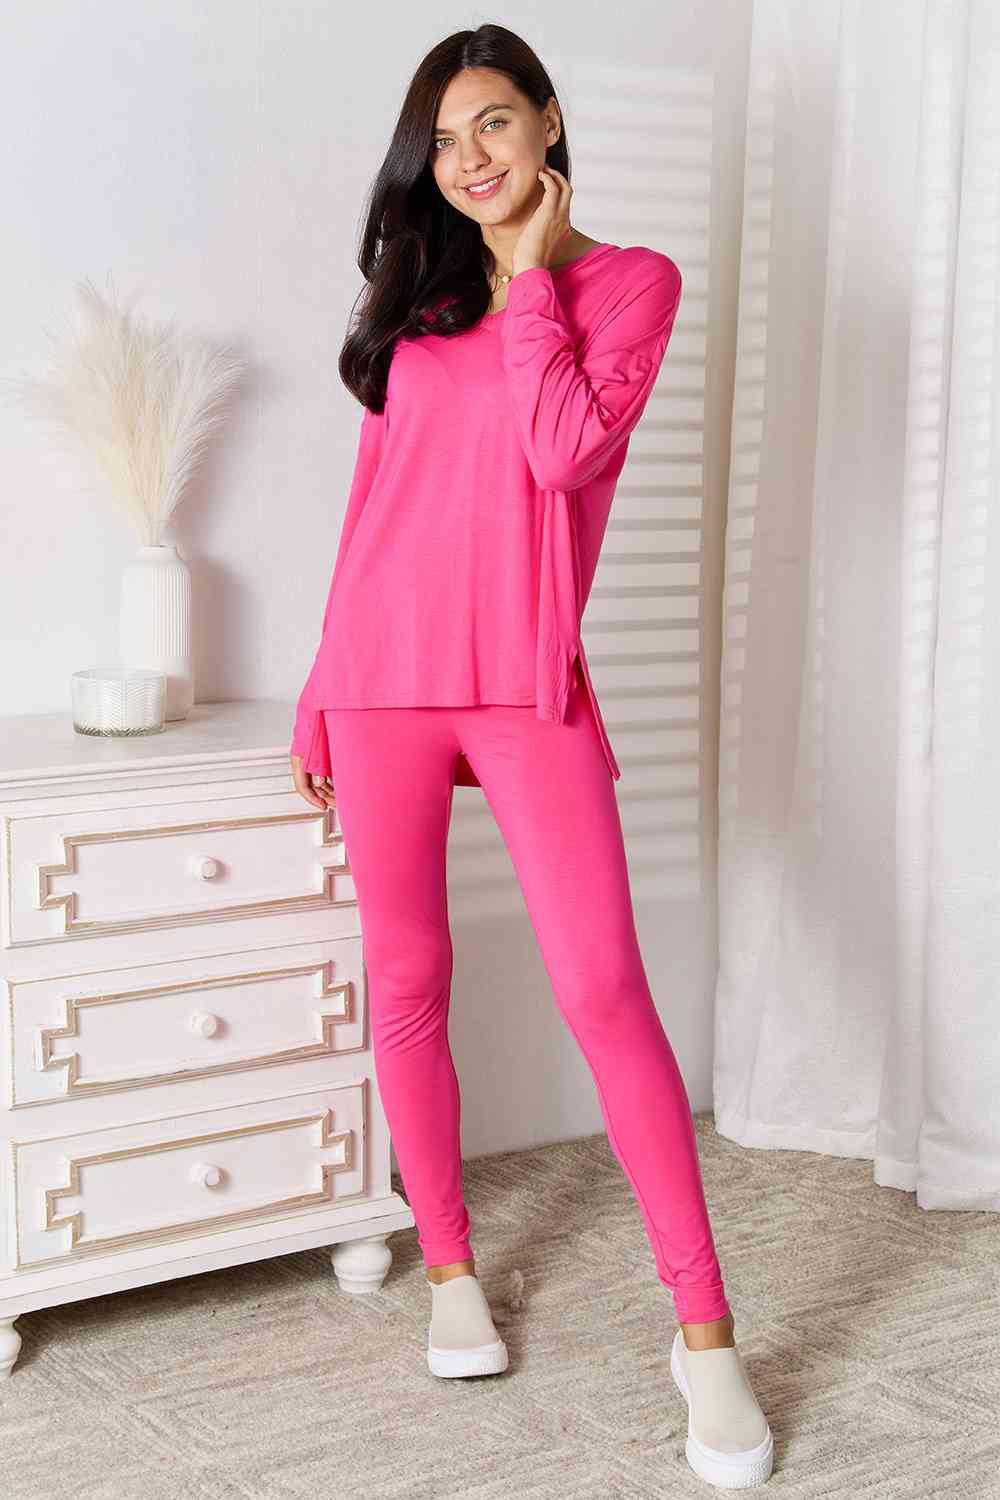 V-Neck Soft Rayon Long Sleeve Top and Pants Lounge Set - Bottoms - Outfit Sets - 3 - 2024